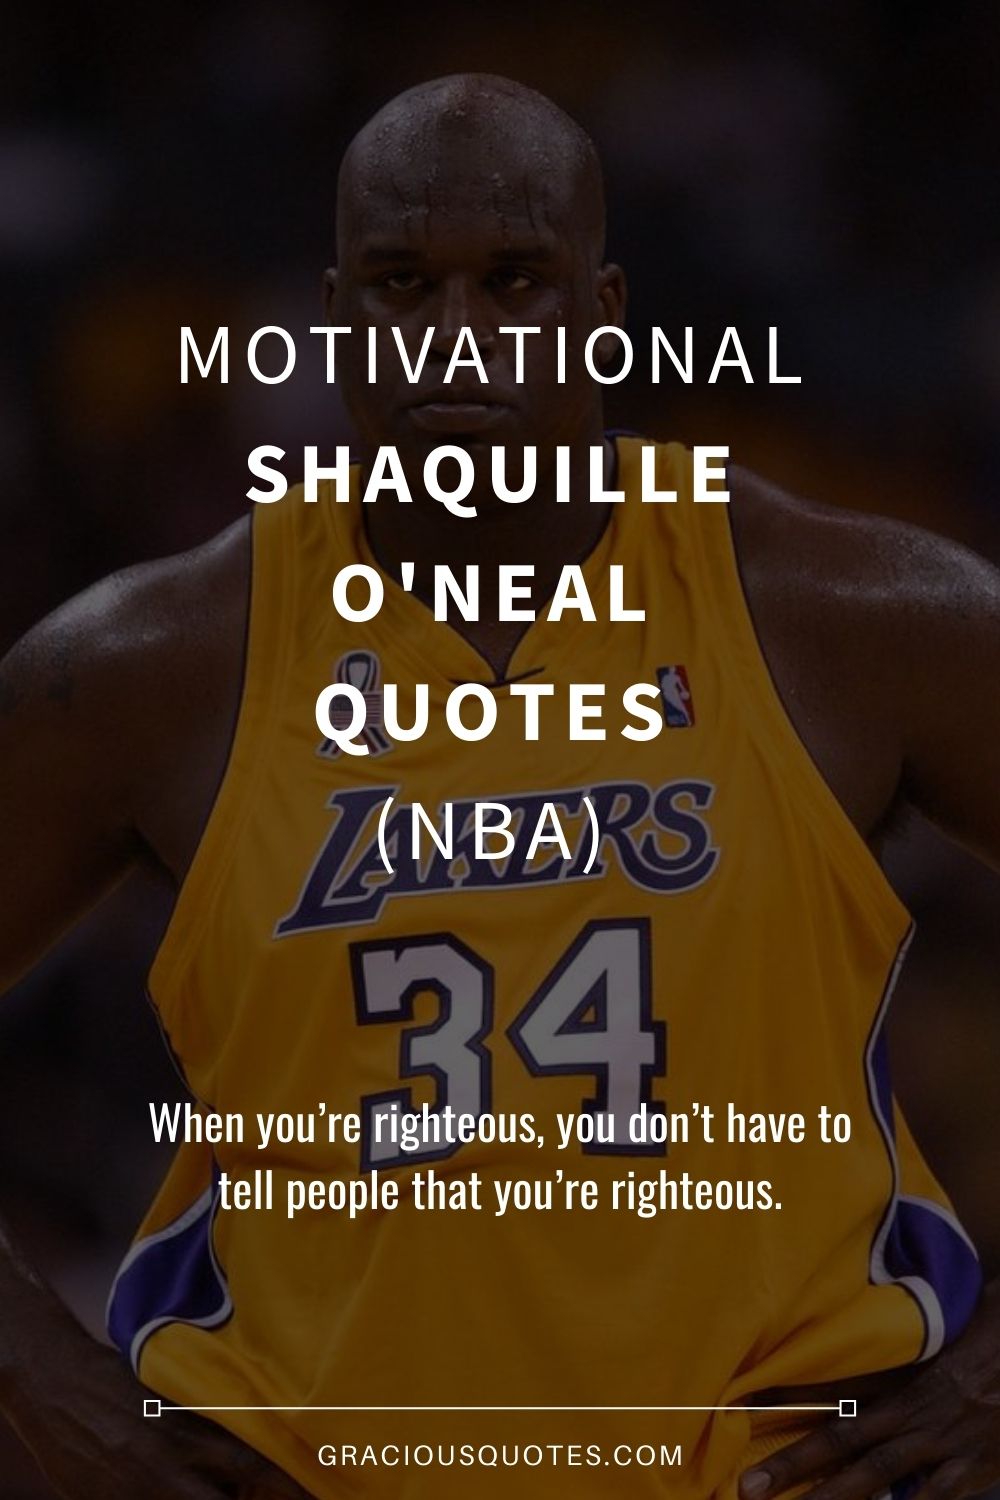 Motivational Shaquille O'Neal Quotes (NBA) - Gracious Quotes